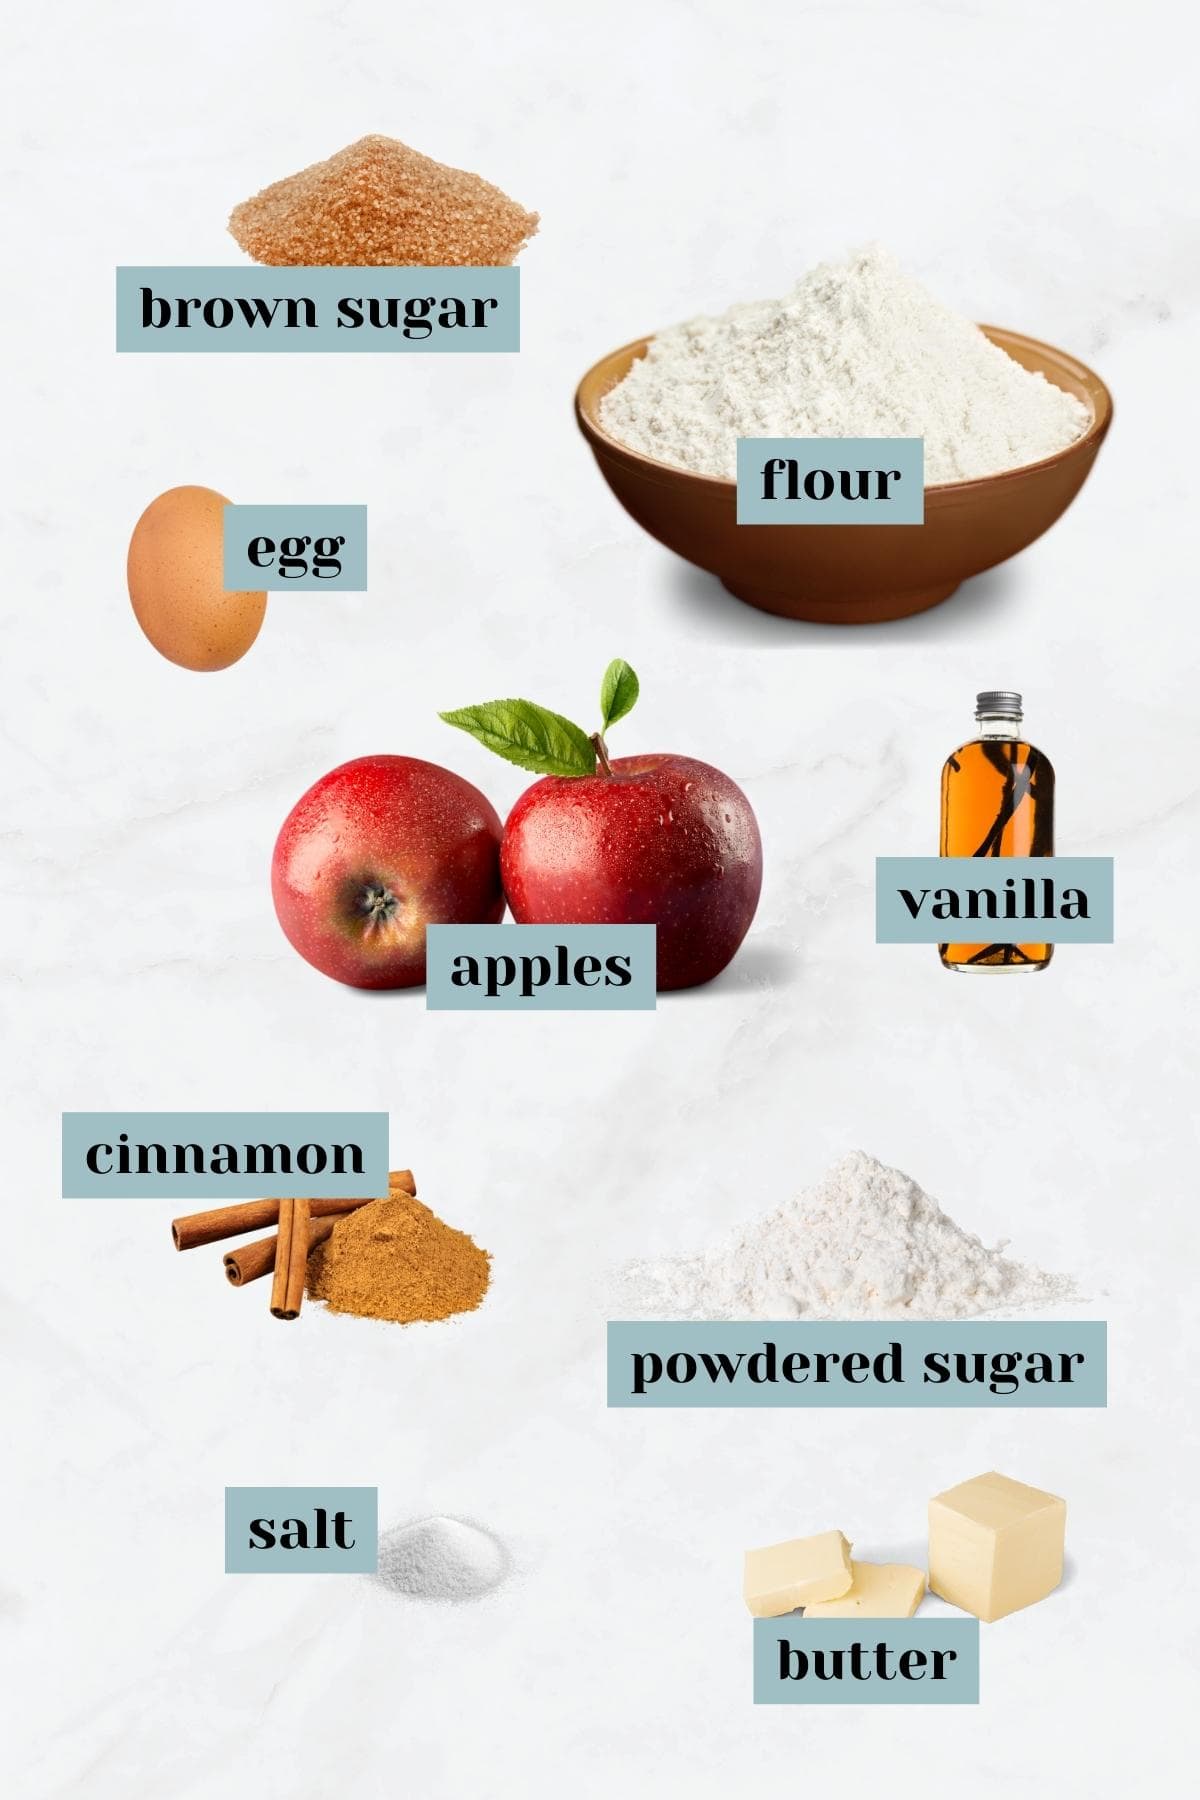 The ingredients for apple pie bars.